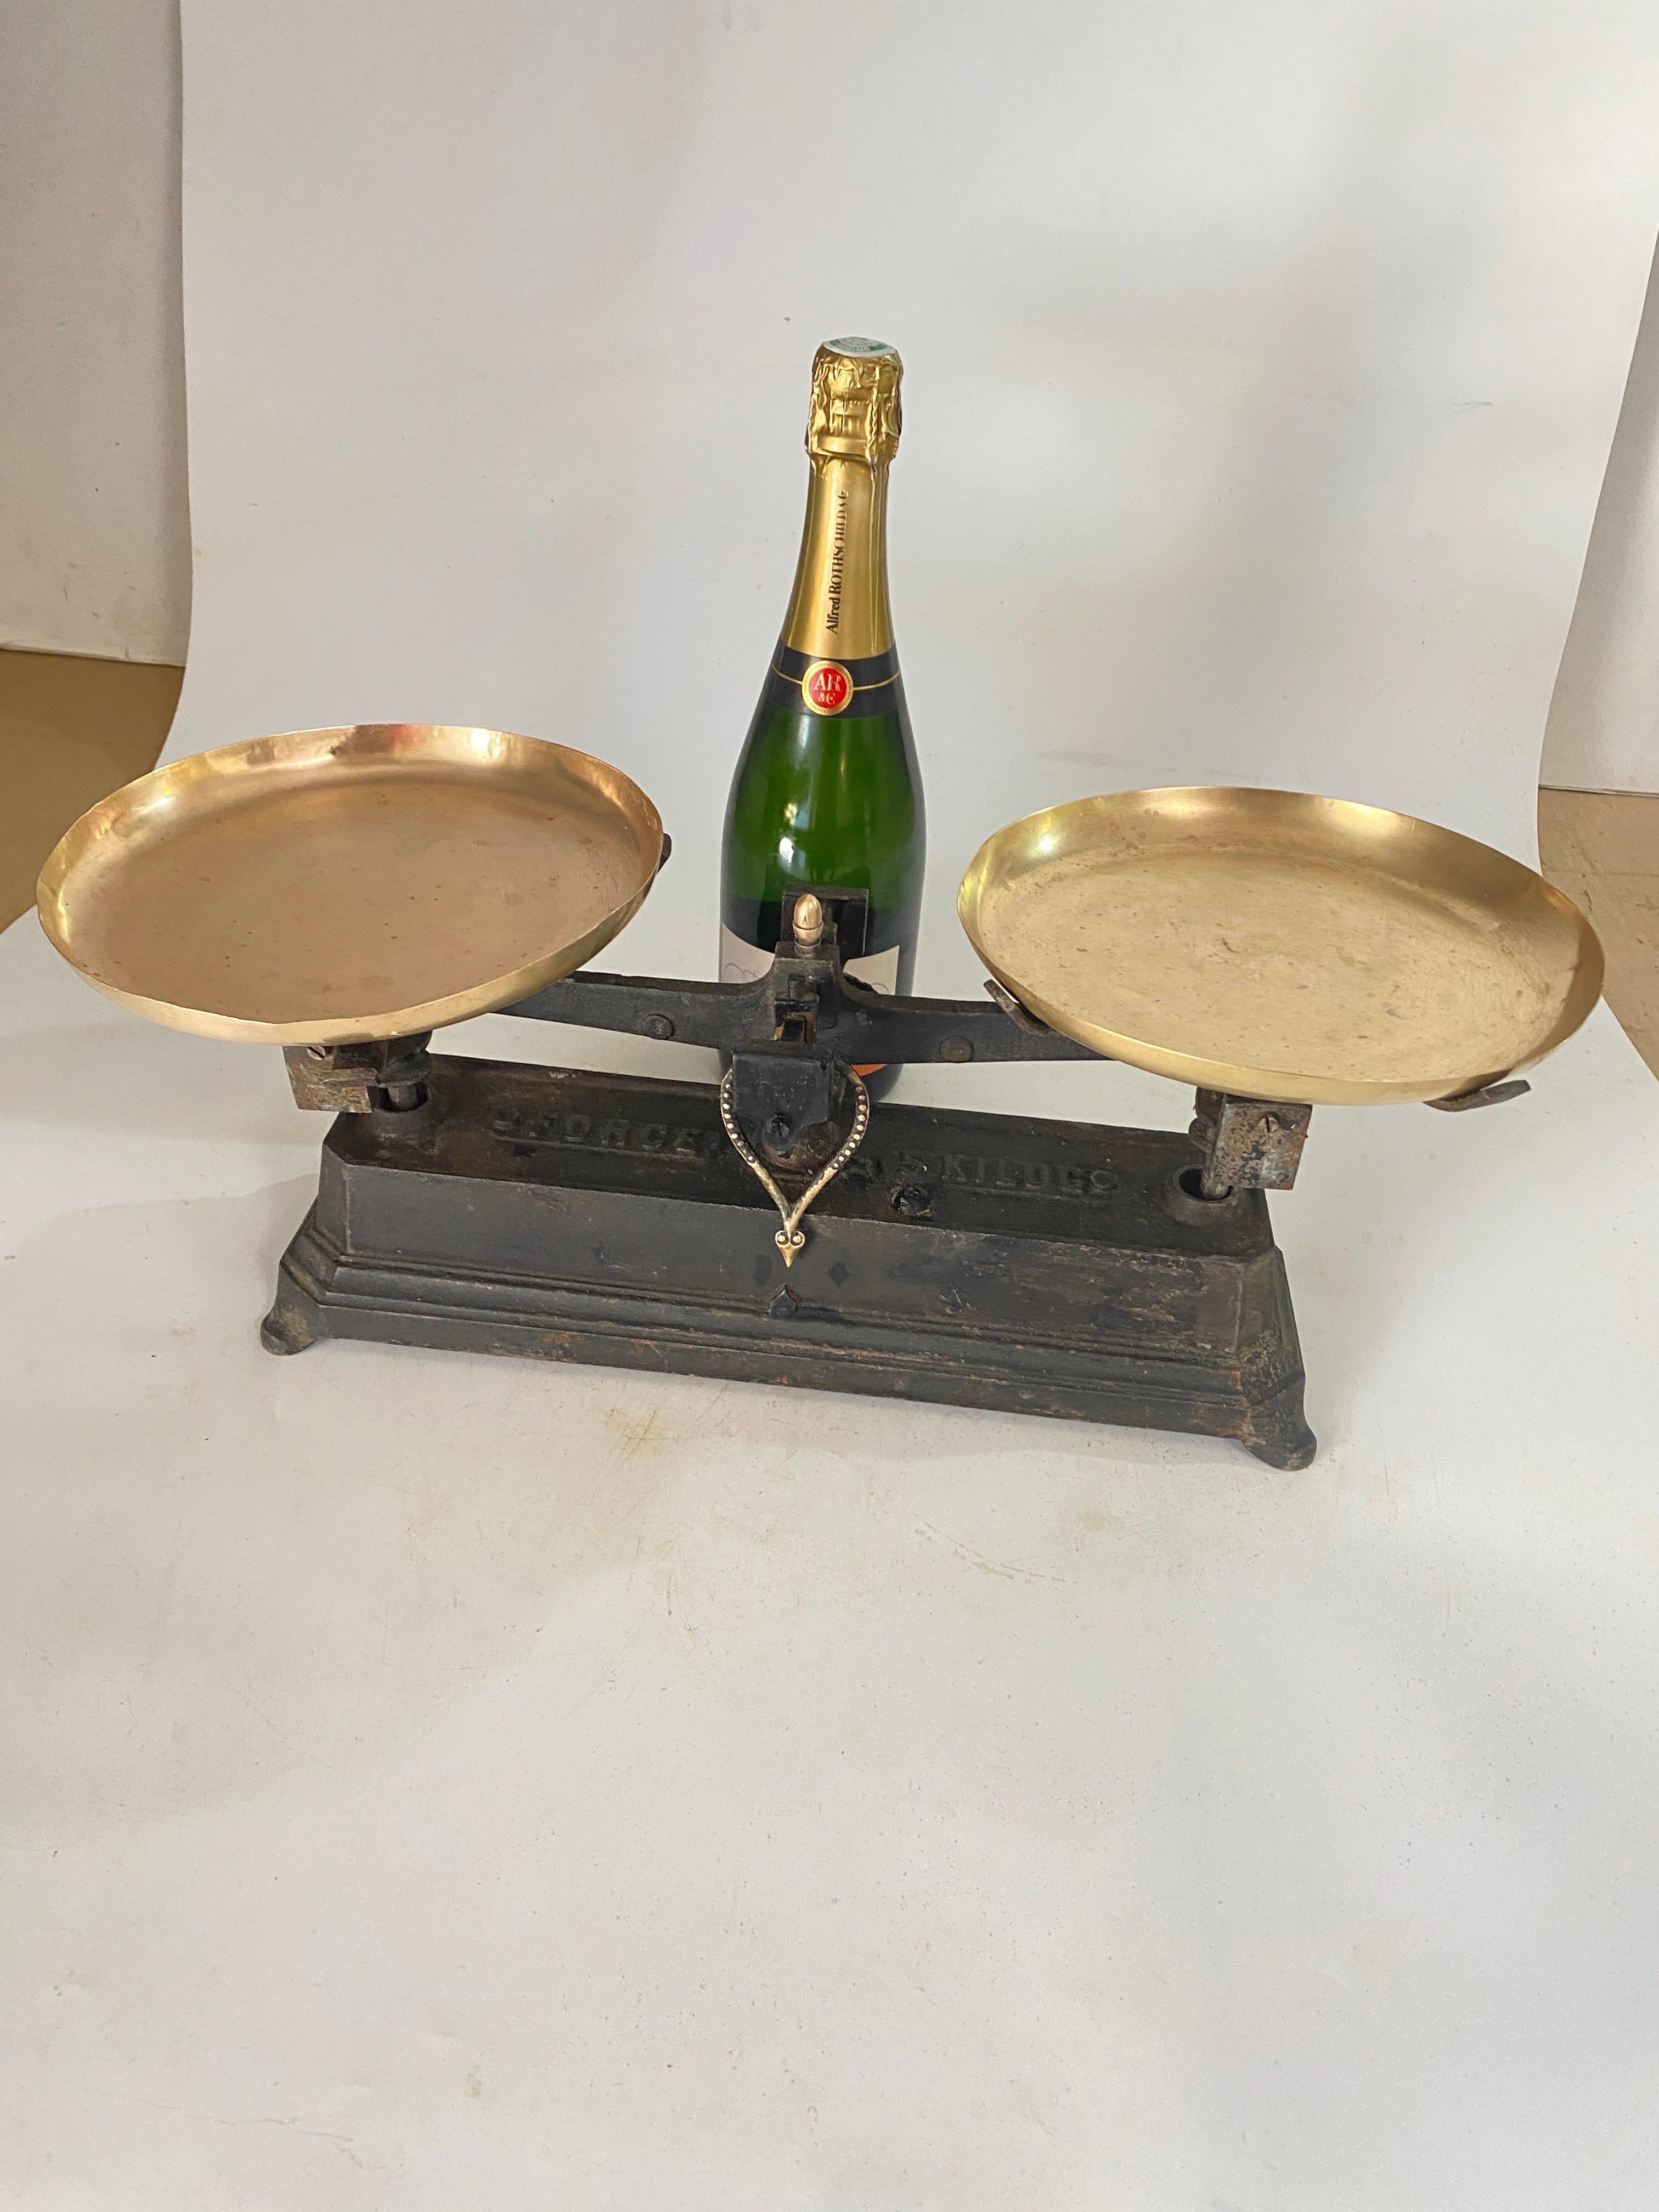 Antiques french Scale, France 20th Century. Wrought Iron and Brass.
This exquisite antique scale will give your kitchen counter a touch of Europe. The iron scale, which is rectangular in shape and was made in France in 1870, has its original pair of